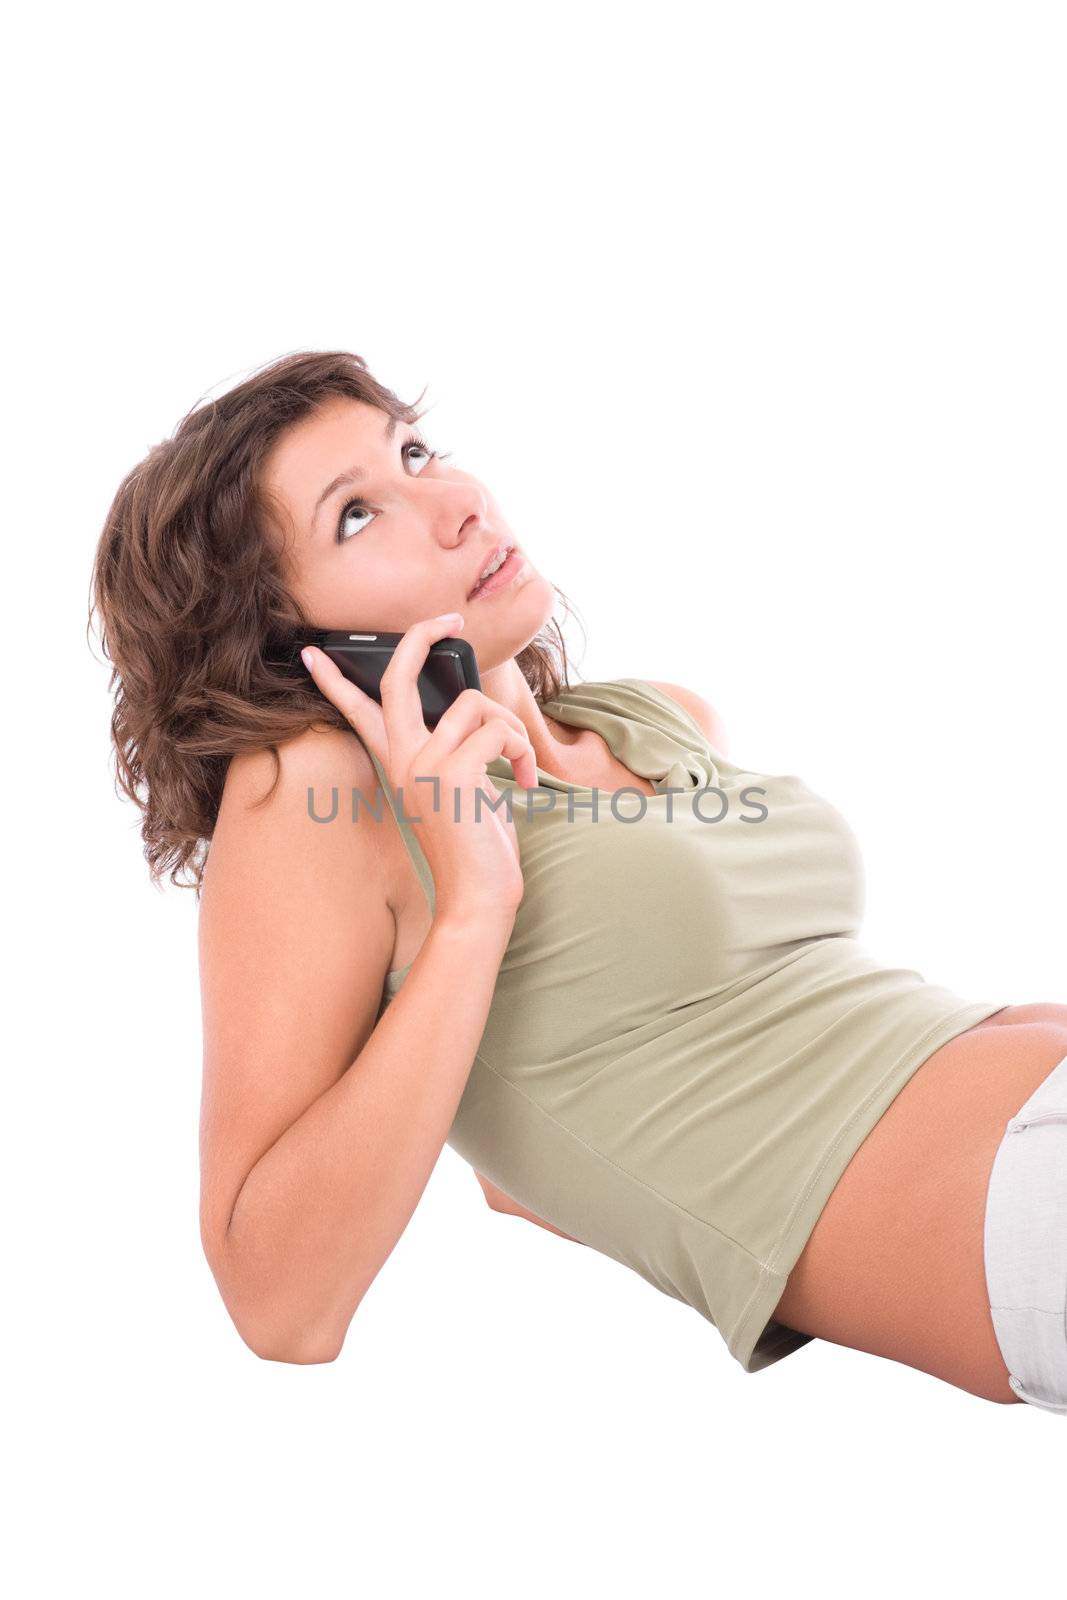 Attractive girl speaking on mobile phone